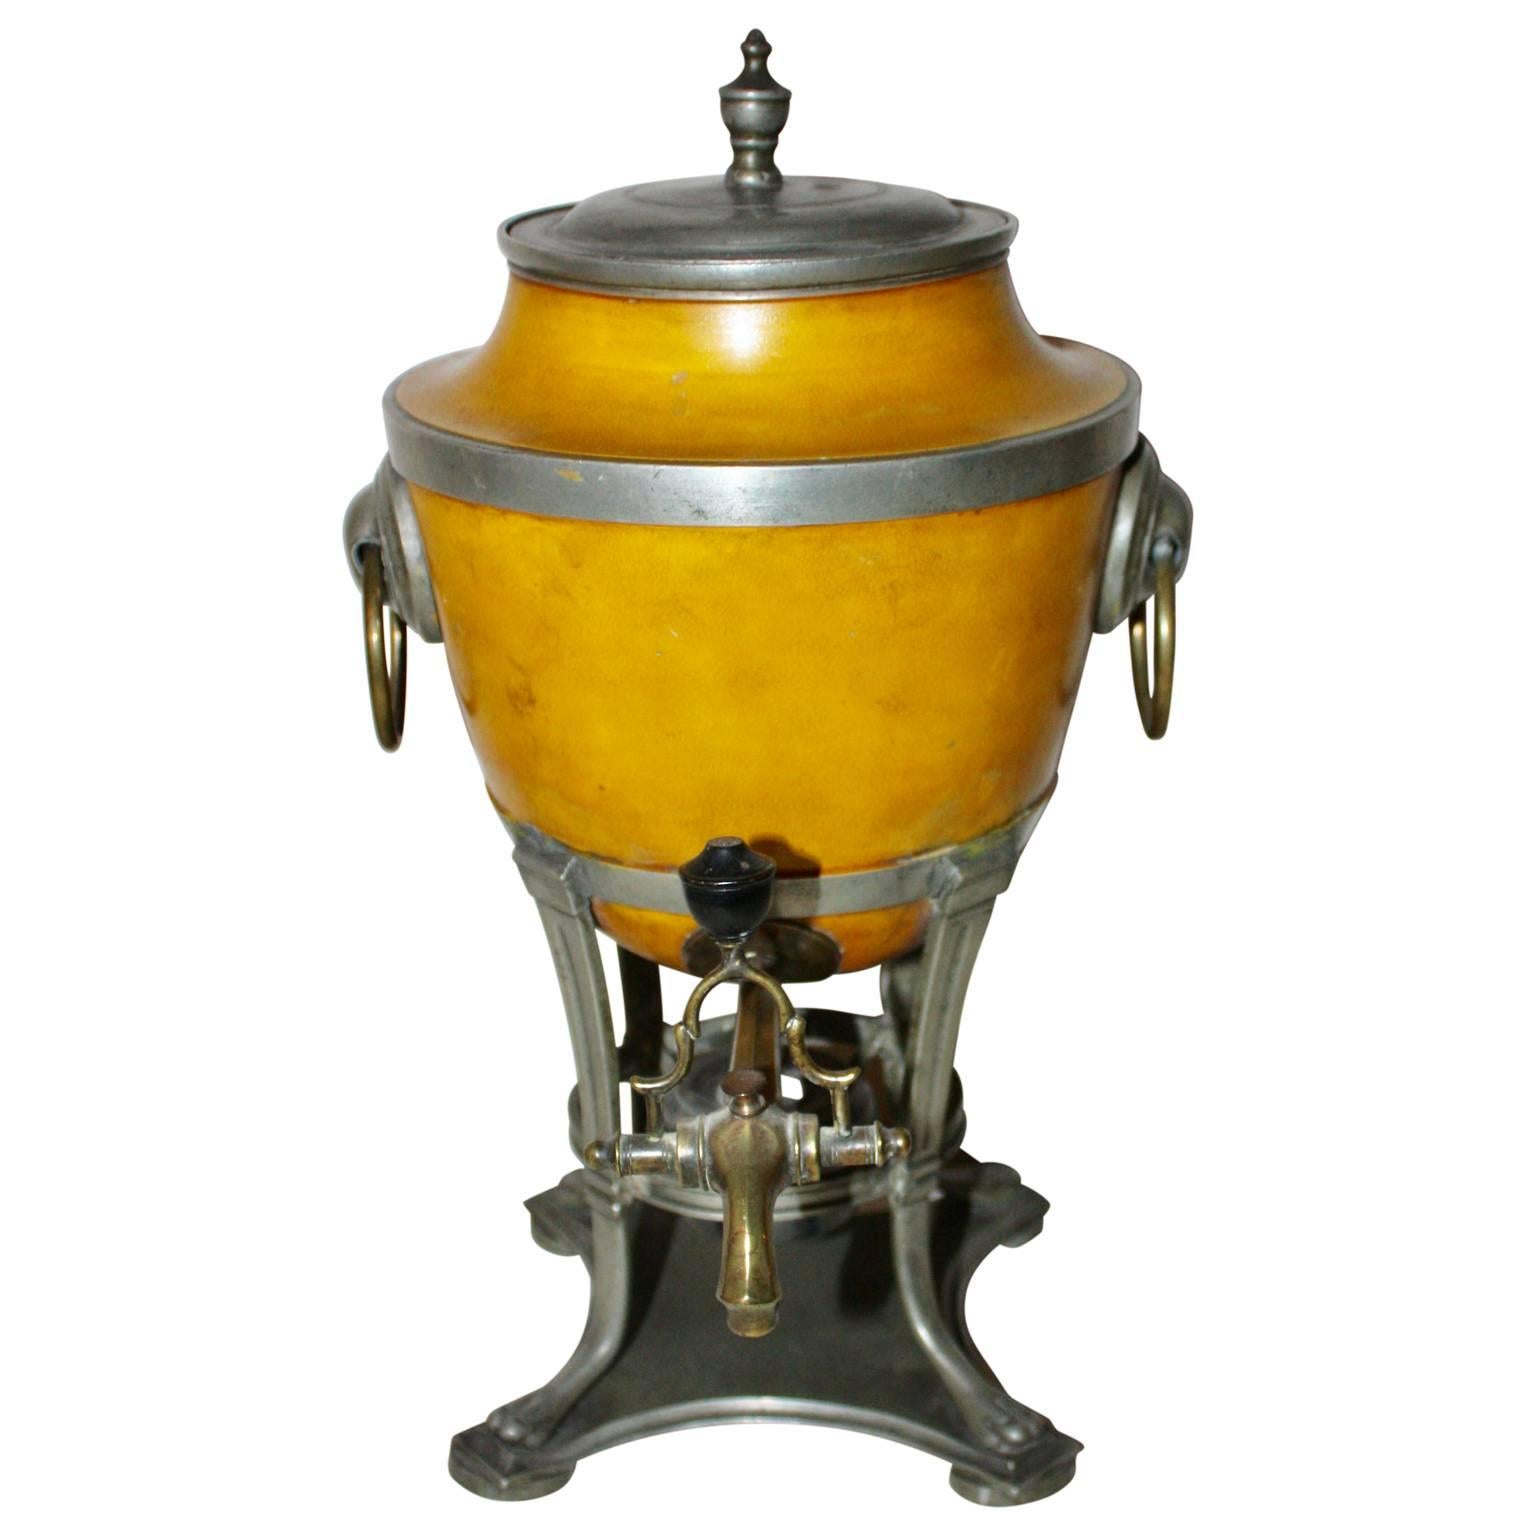 Amazing samovar in partly yellow cold-painted pewter and brass faucet.